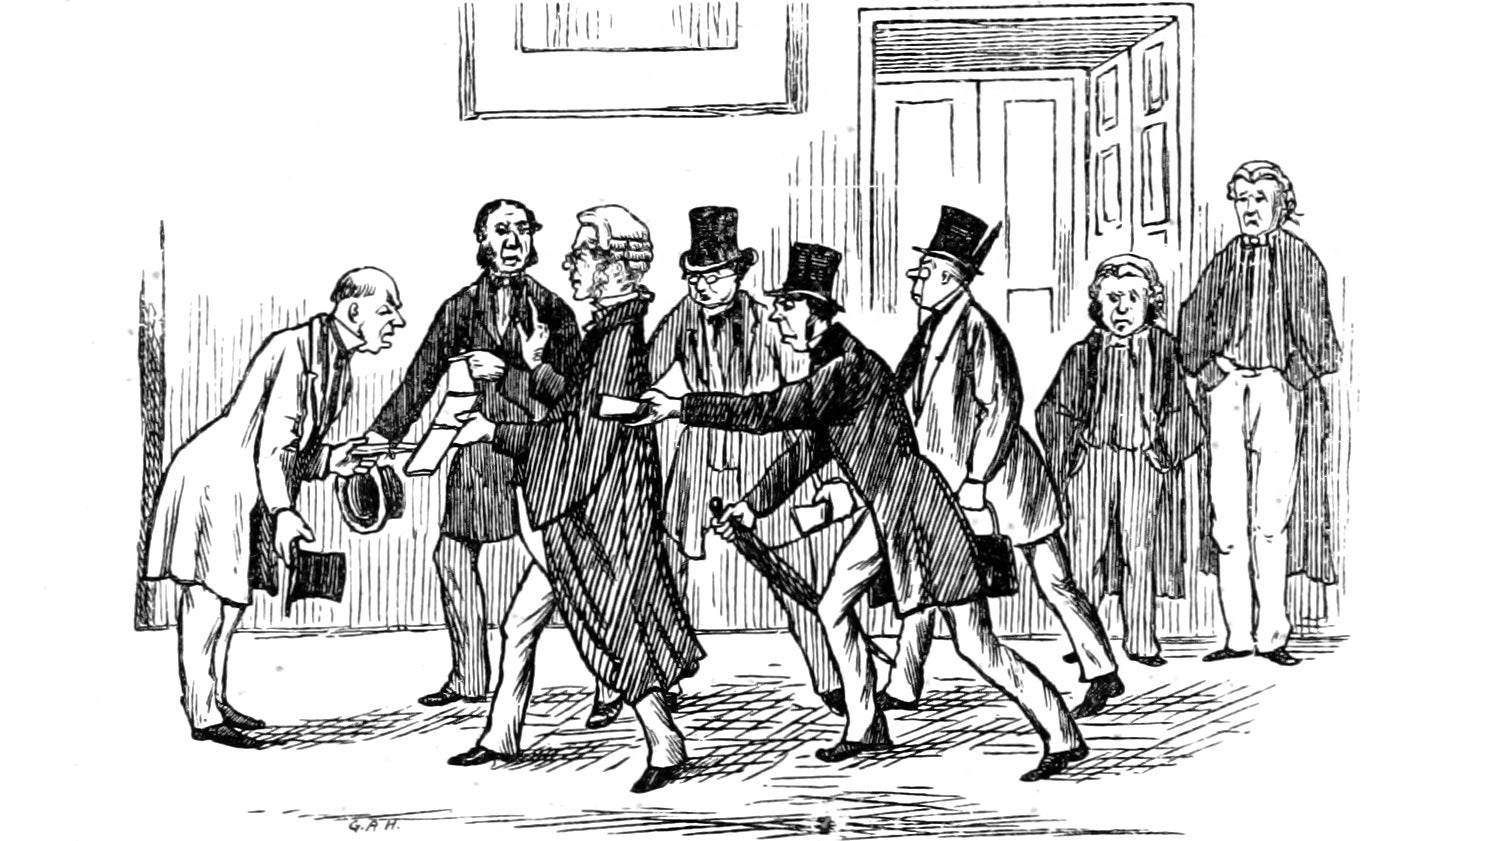 Parliamentary arguments in an illustration from 'Ballads of the Bench and Bar; or, Idle Lays of the Parliament House'.